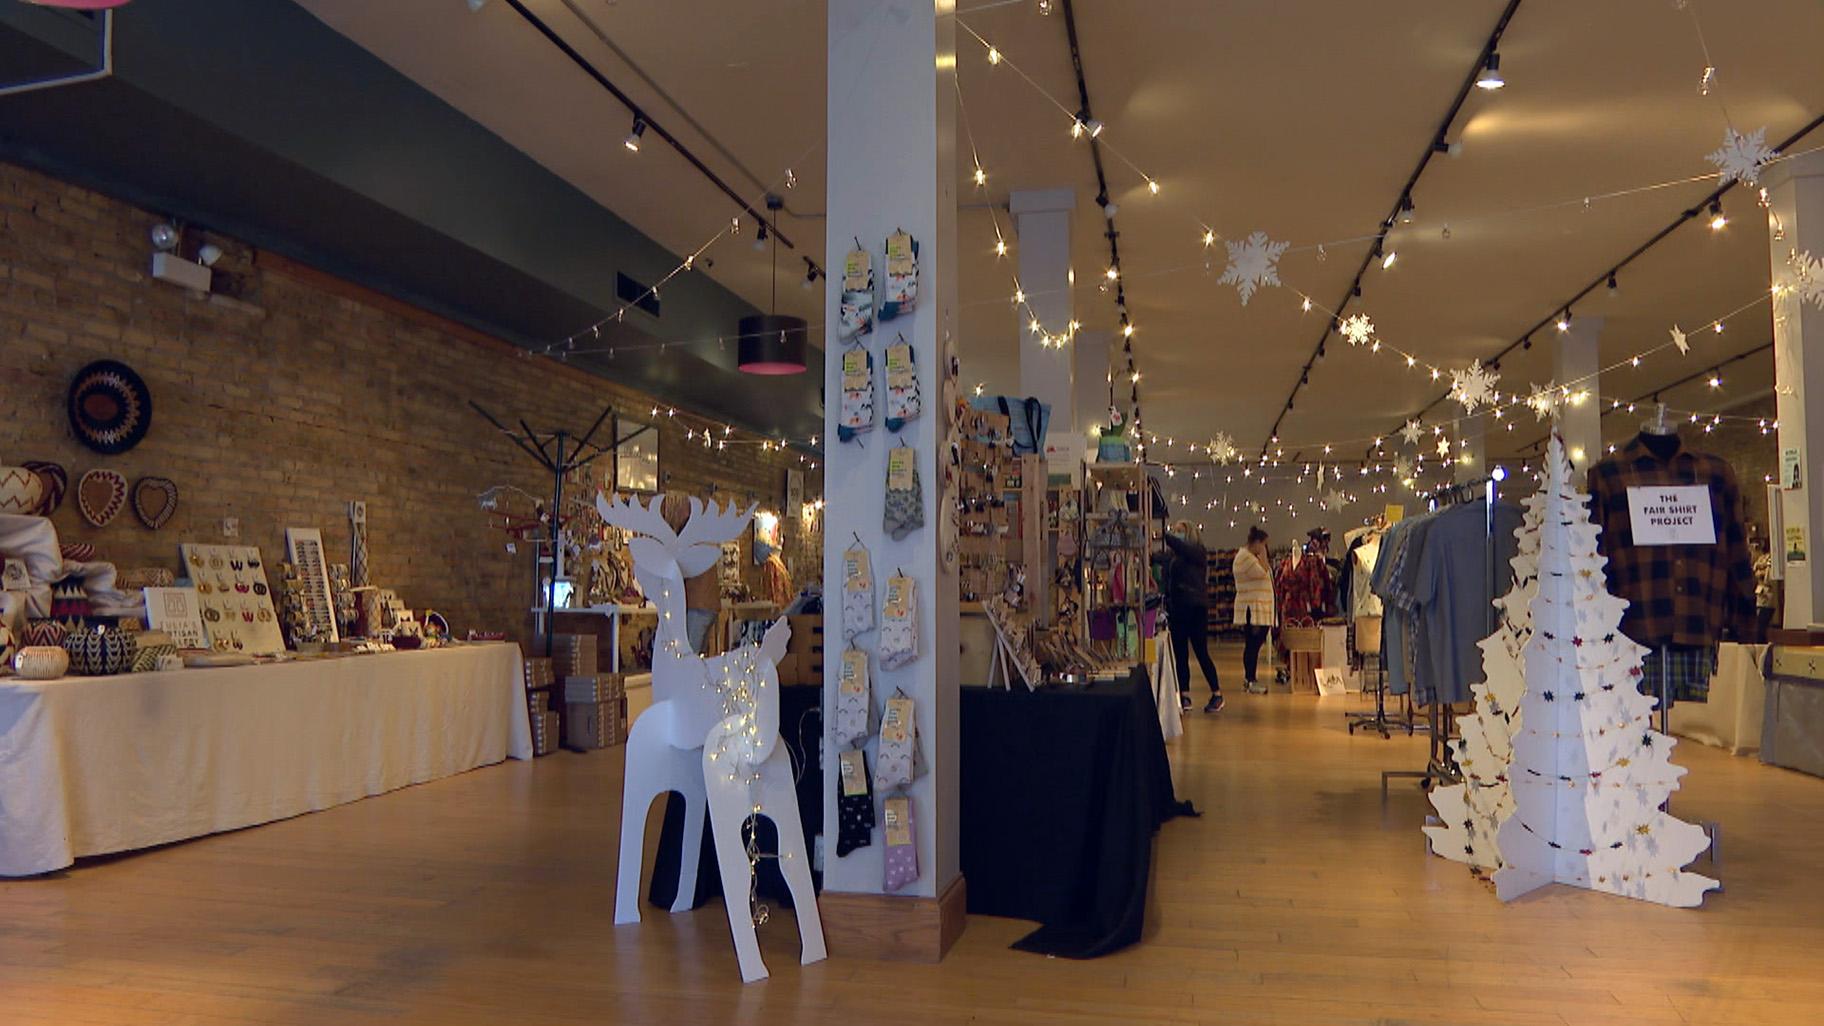 In Andersonville, Chicago Fair Trade is hosting its 8th annual holiday pop-up shop through December 24 with a wide range of handmade items from home décor to jewelry from over 30 countries. (WTTW News)